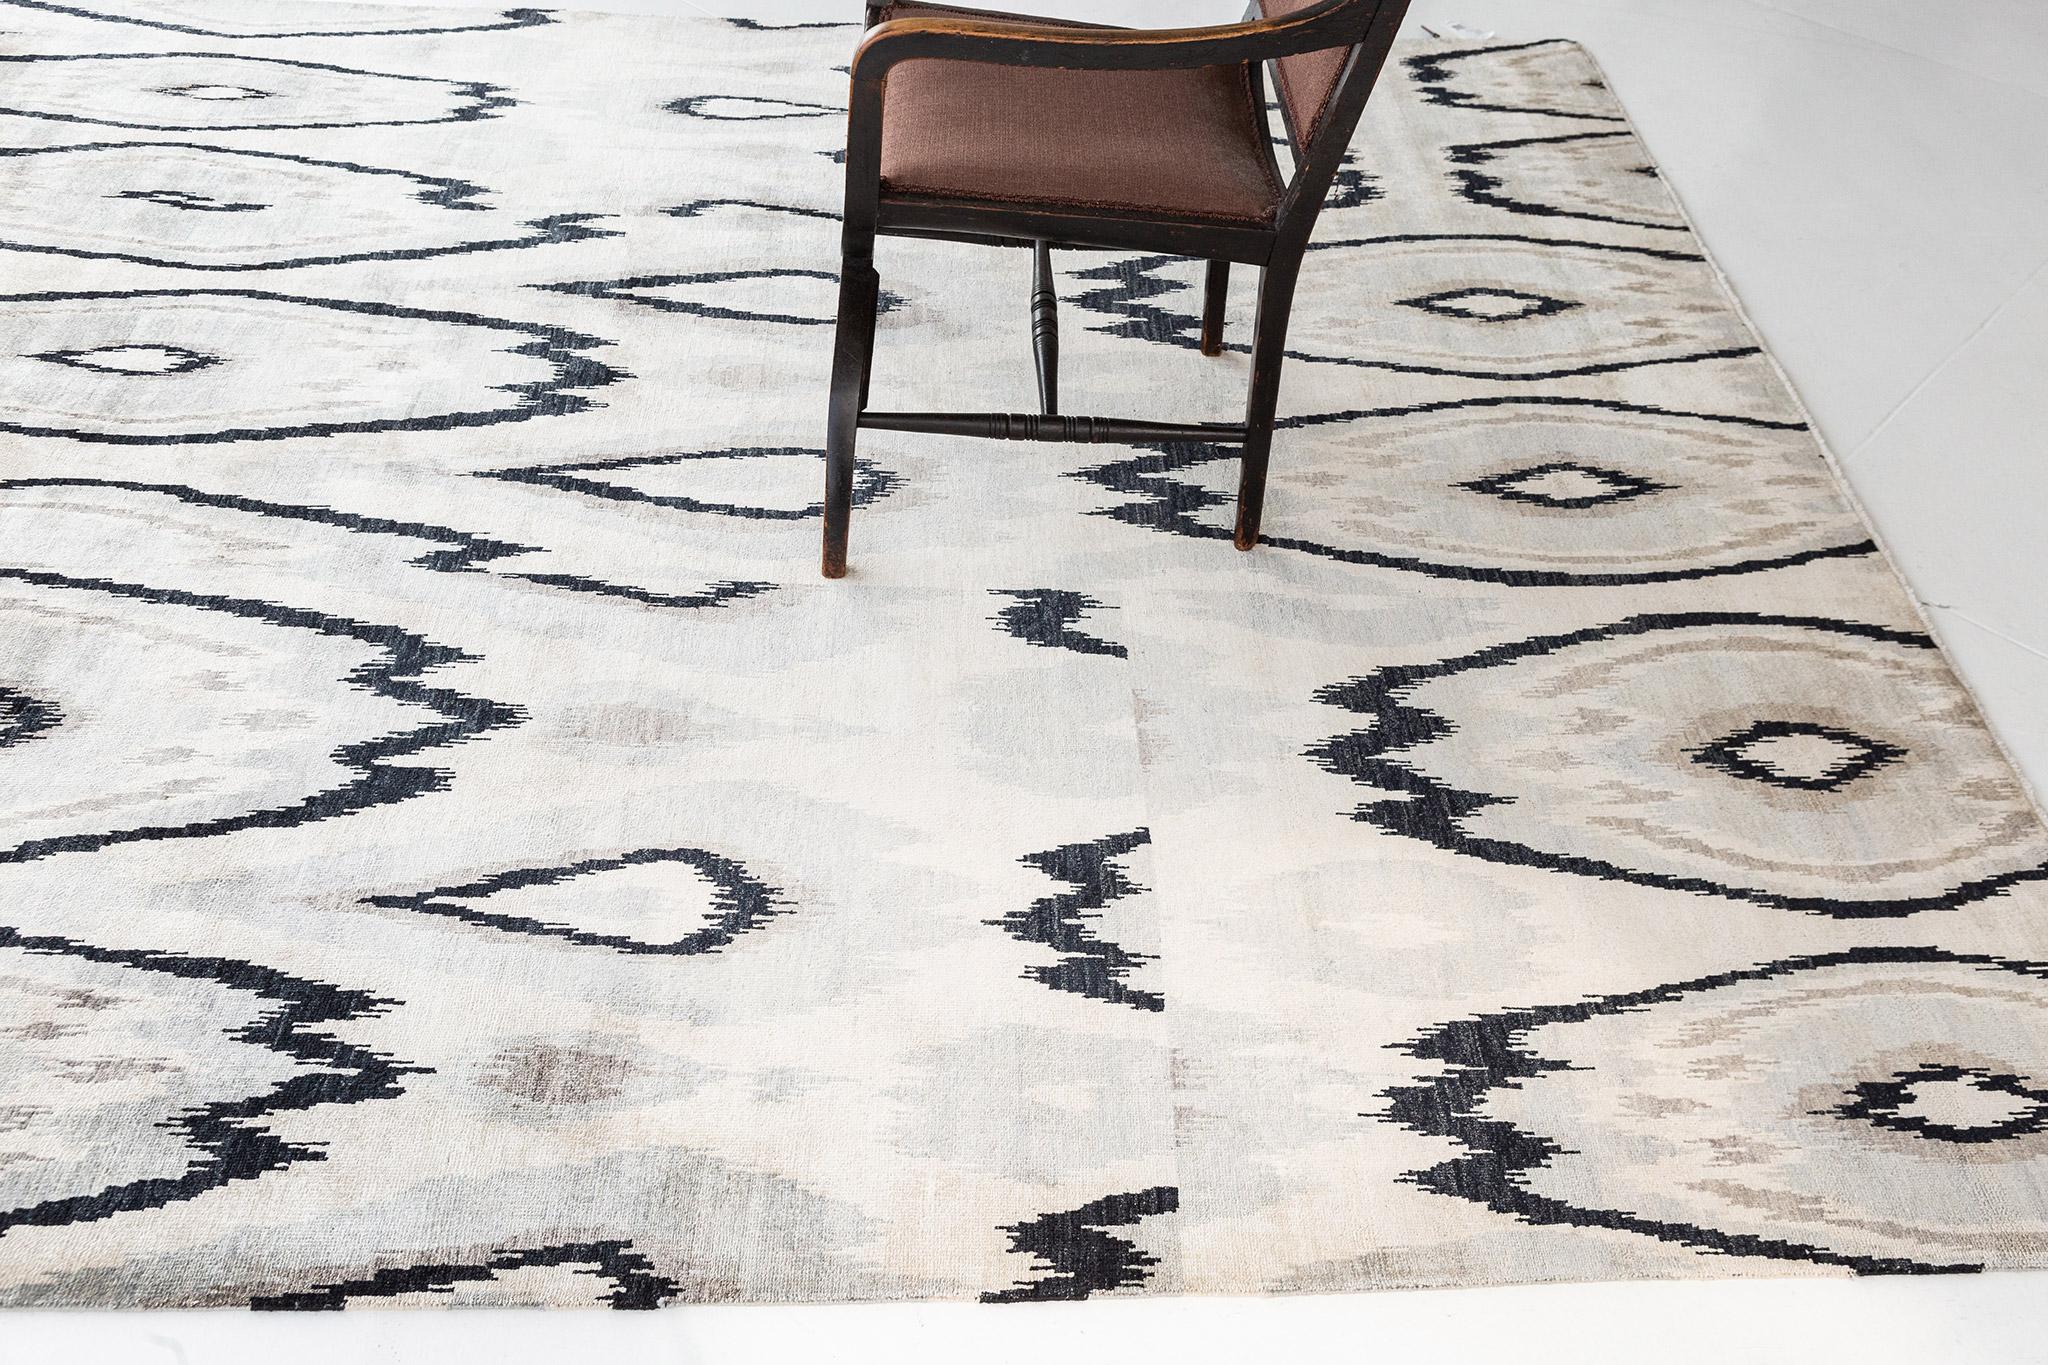 Ikat Design rug in Alacha showcases an all-over adventurous geometric Ikat pattern composed of organic shapes in different sizes creating a striking retro effect over the entire composition. Incorporating the plush and soft silk neutral colours into